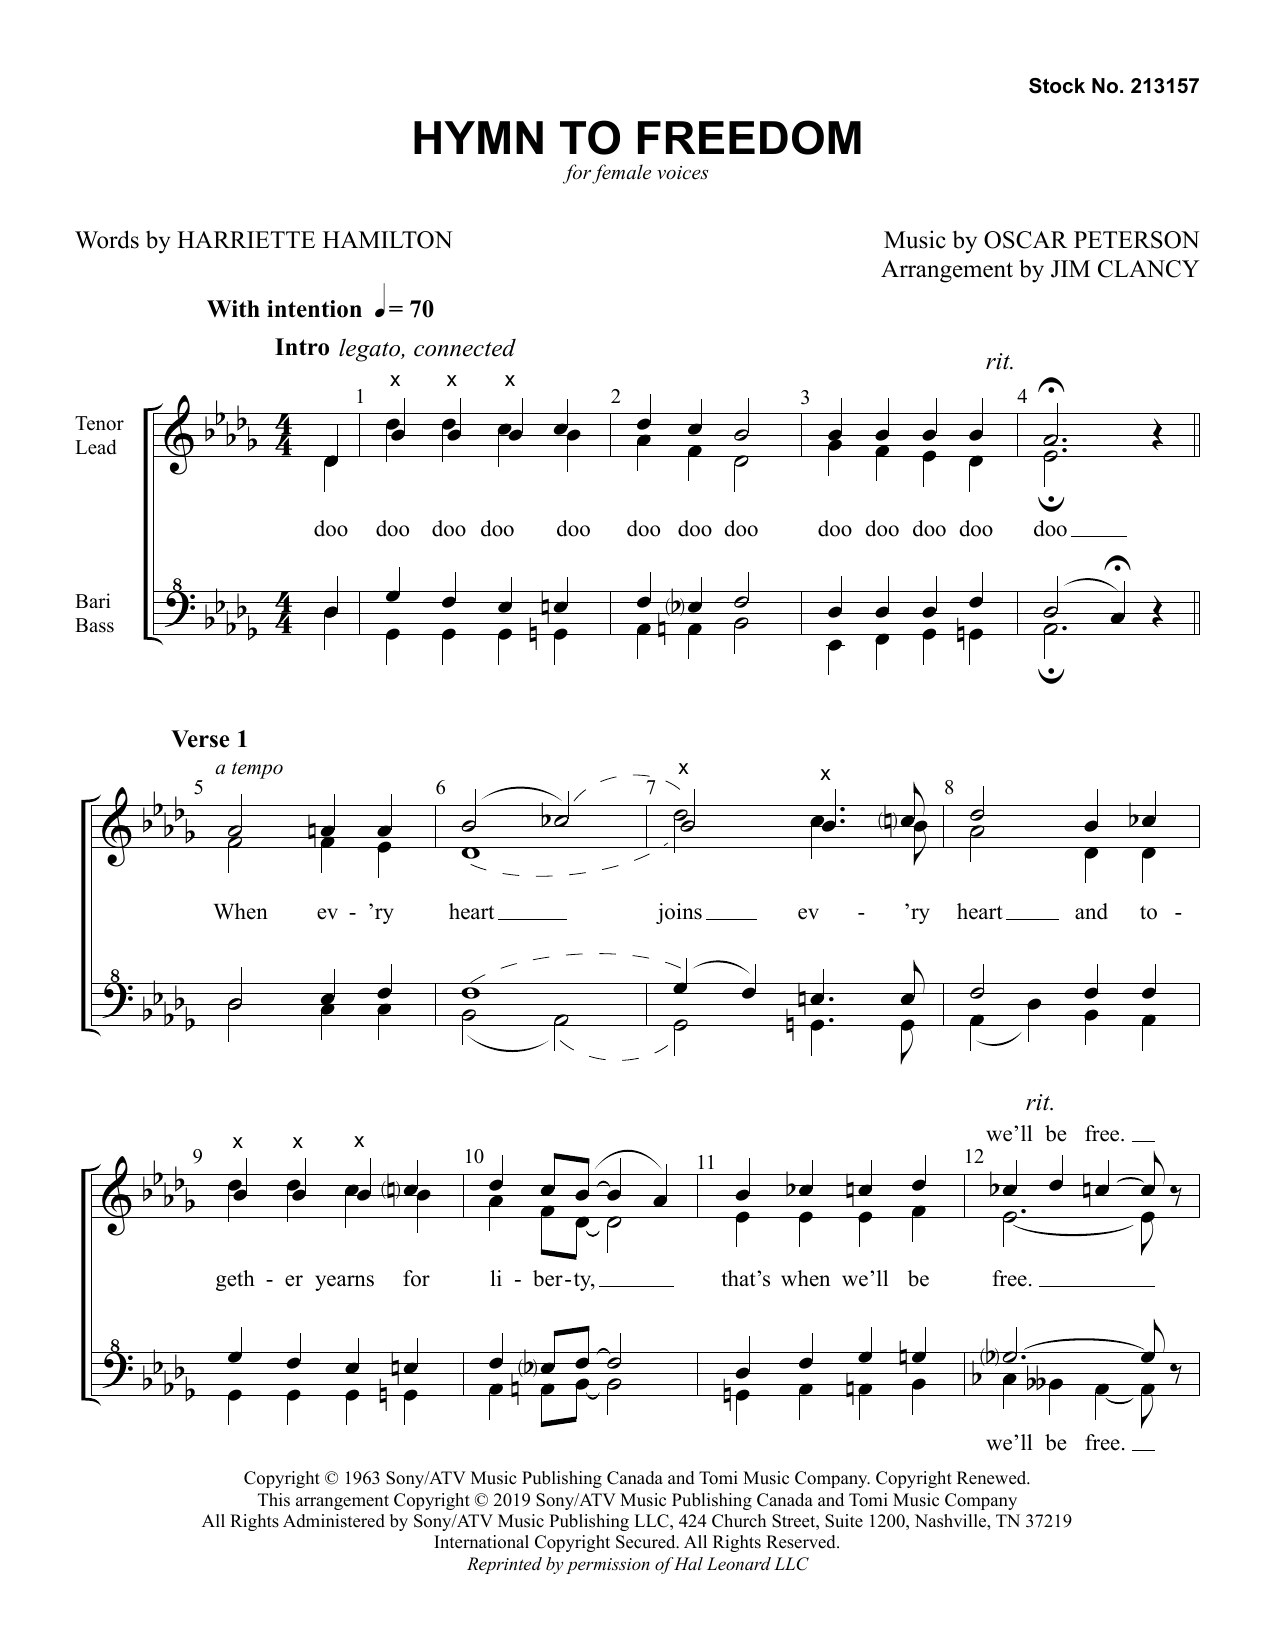 Download Oscar Peterson Hymn to Freedom (arr. Jim Clancy) Sheet Music